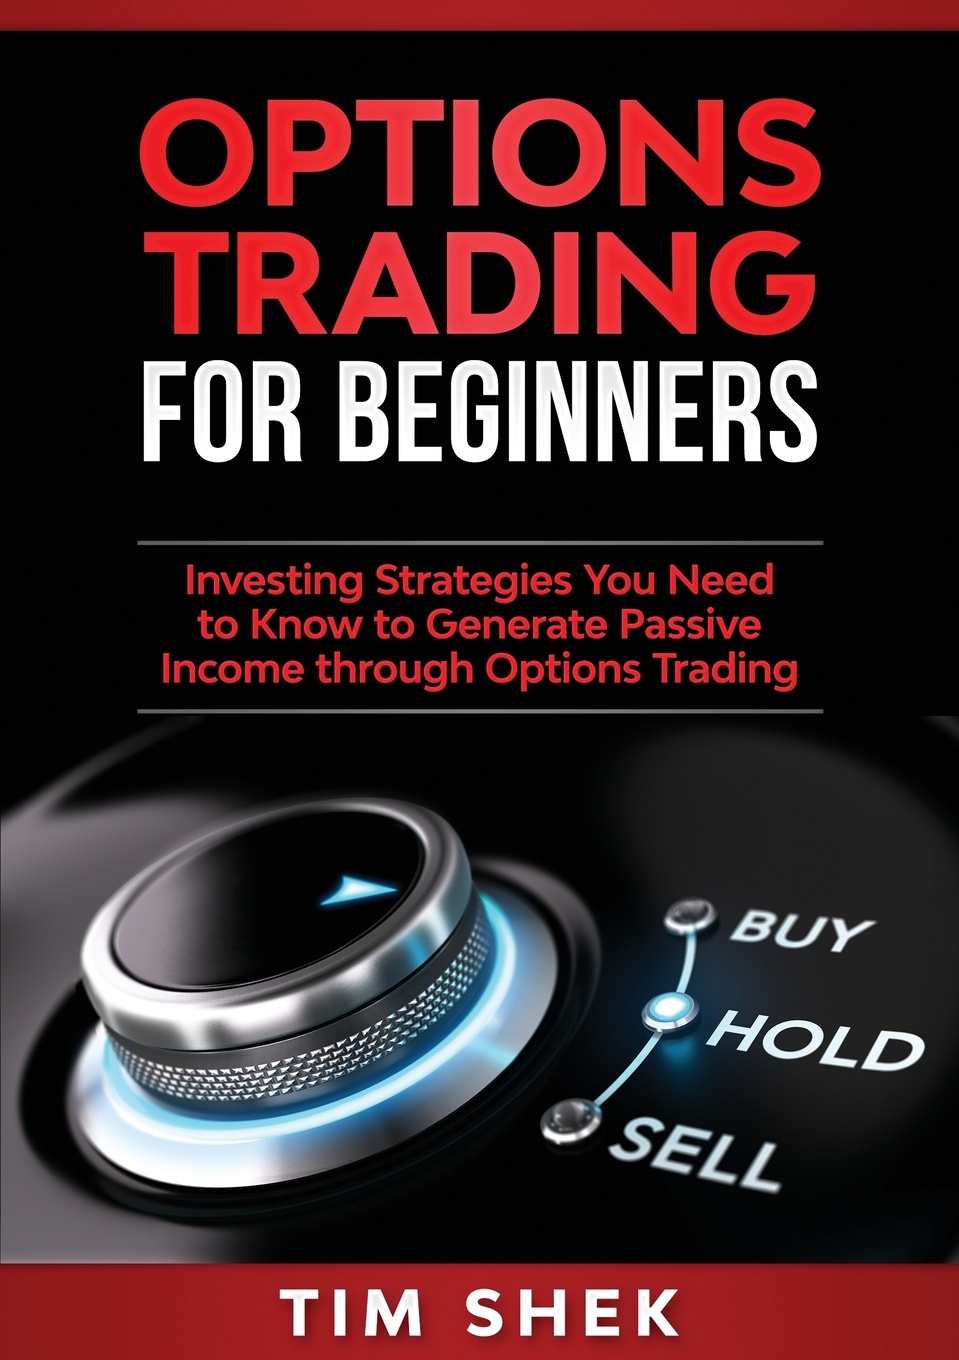 Options Trading for Beginners. Investing Strategies You Need to Know to Generate Passive Income through Options Trading